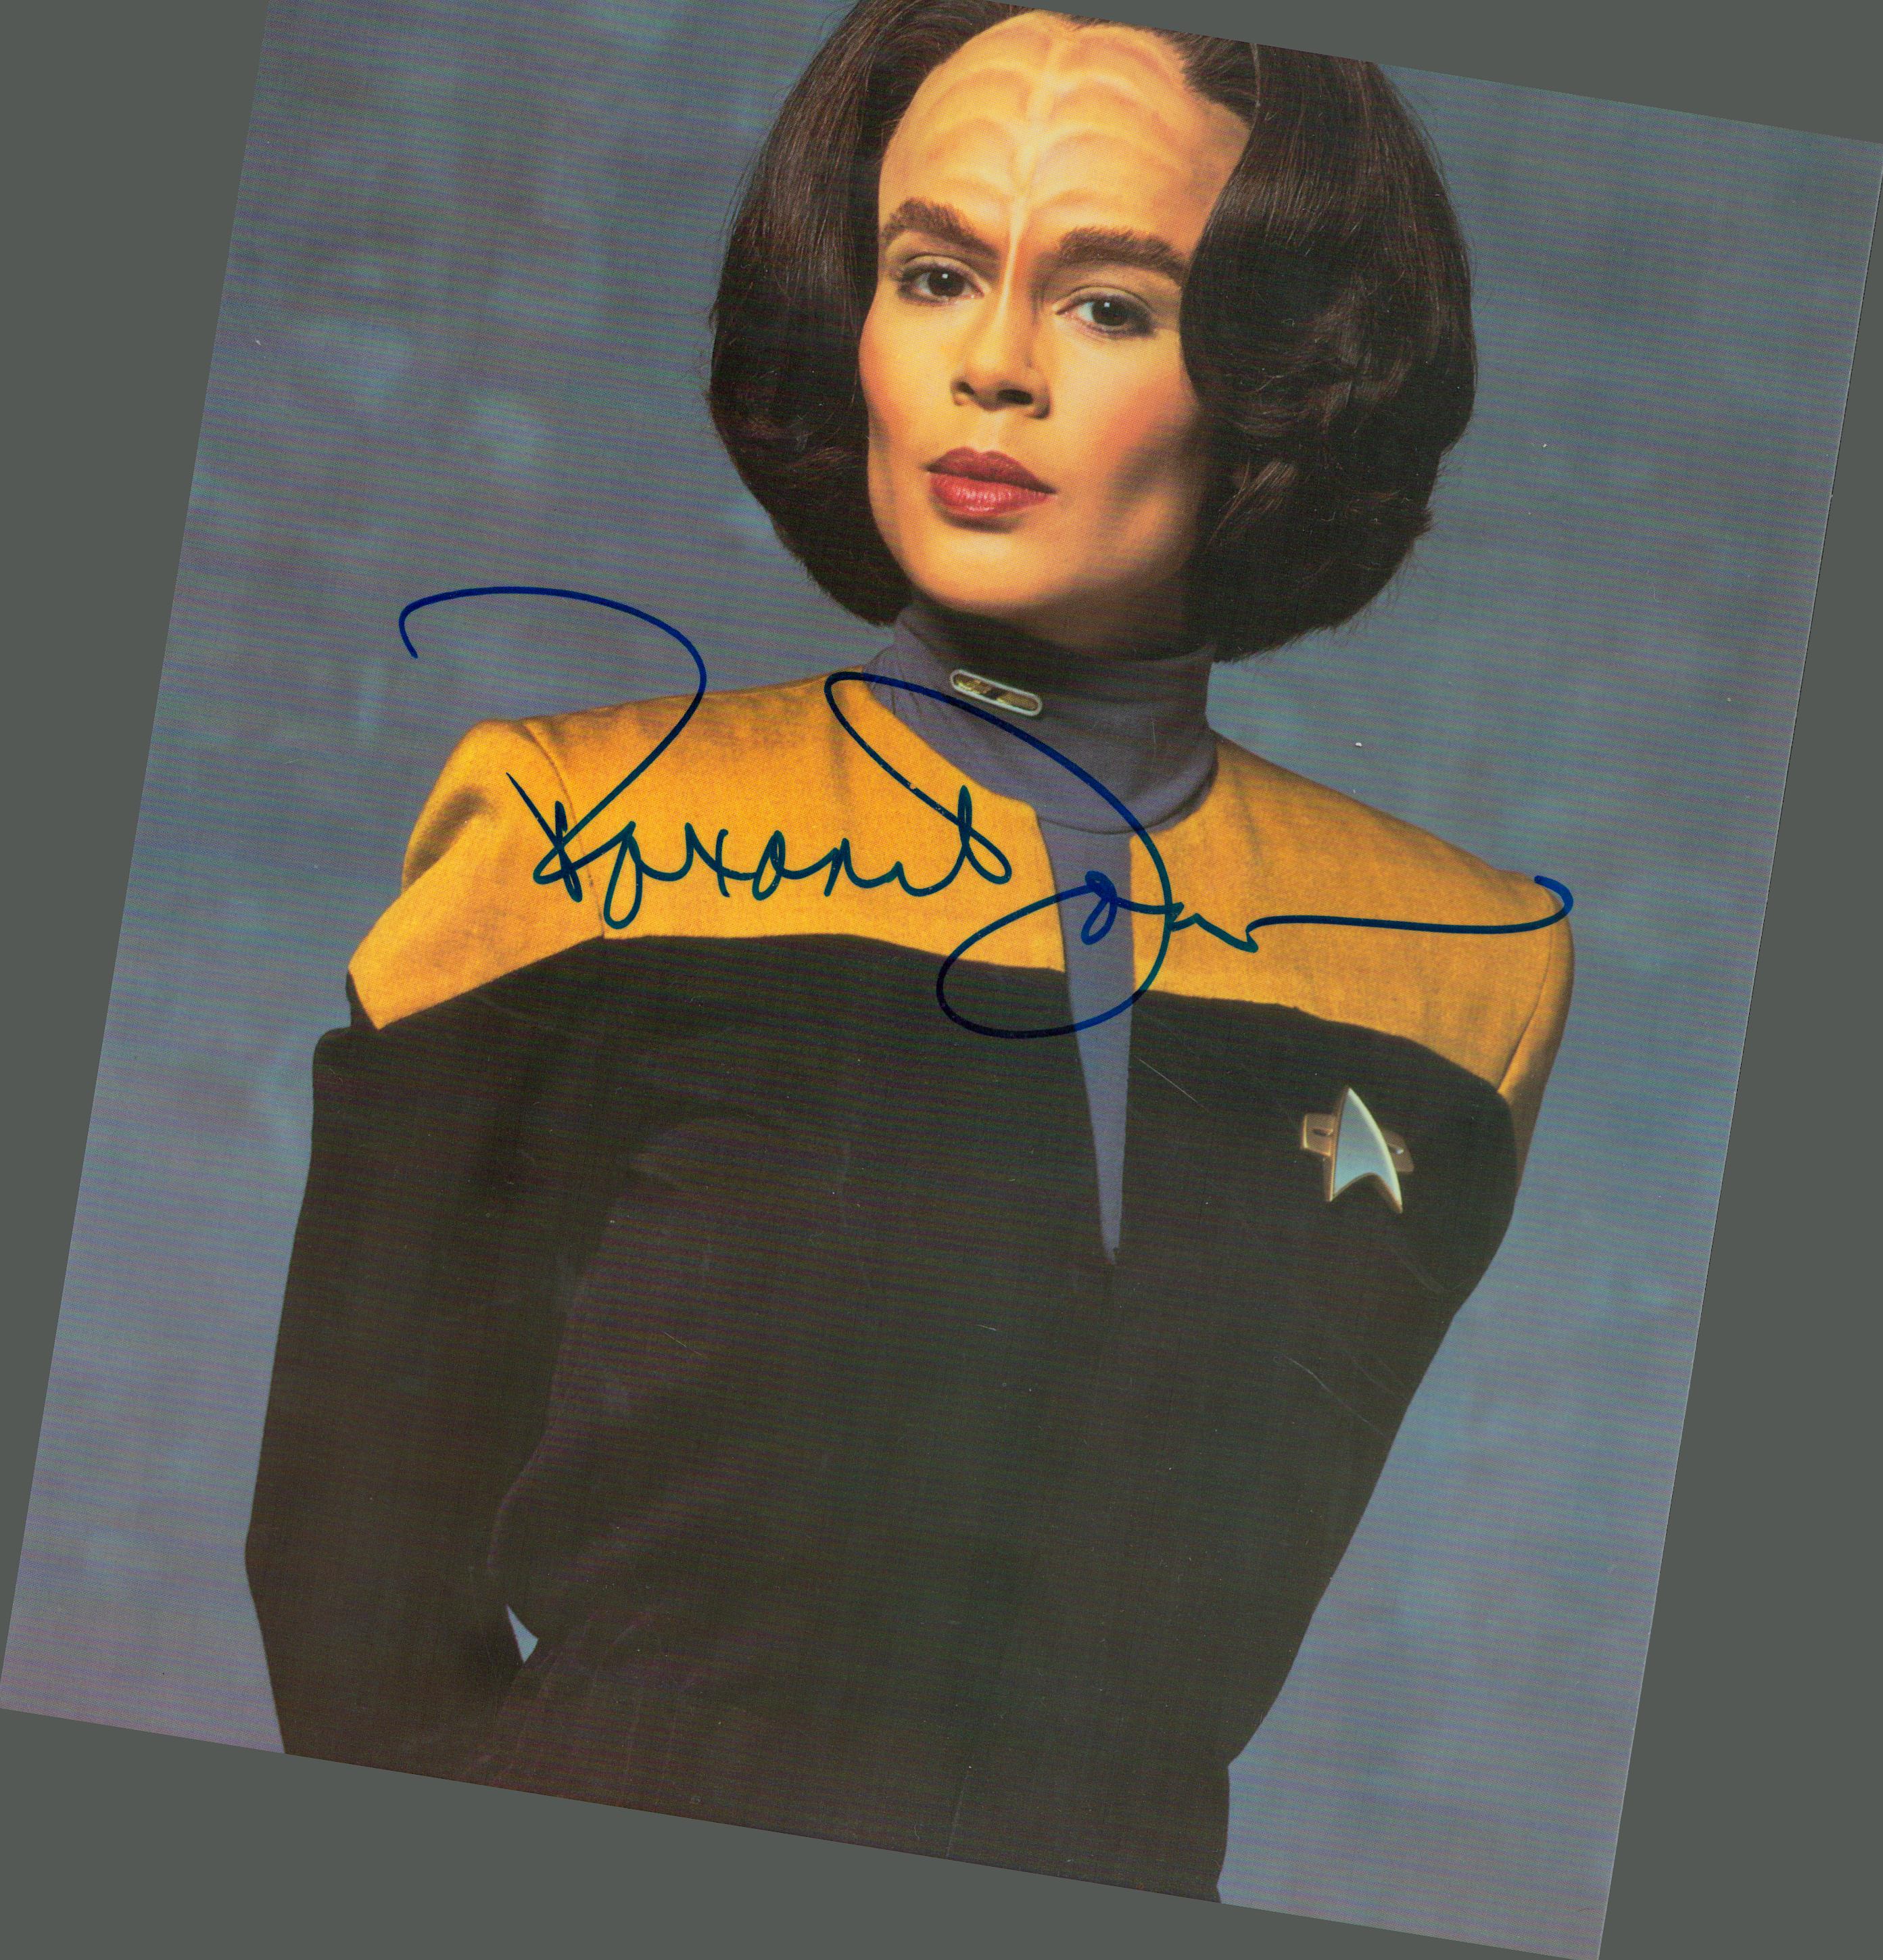 Roxann Dawson signed 10x8 inch colour promo photo pictured in her role as B'Elanna Torres from the